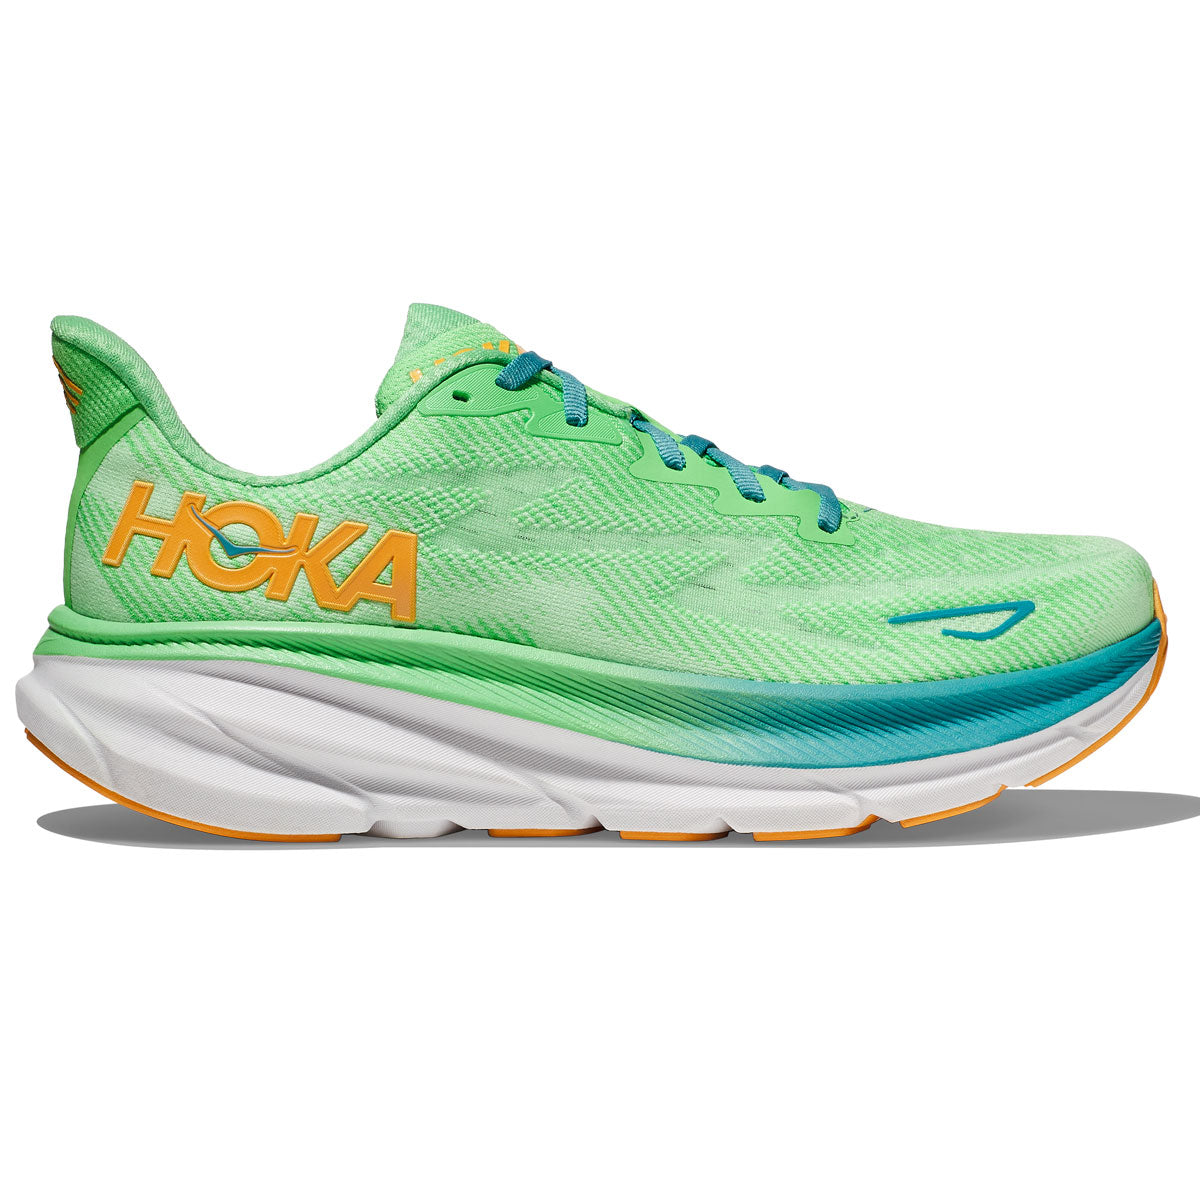 Hoka One One Clifton 9 Running Shoes - Mens - Zest/Lime Glow